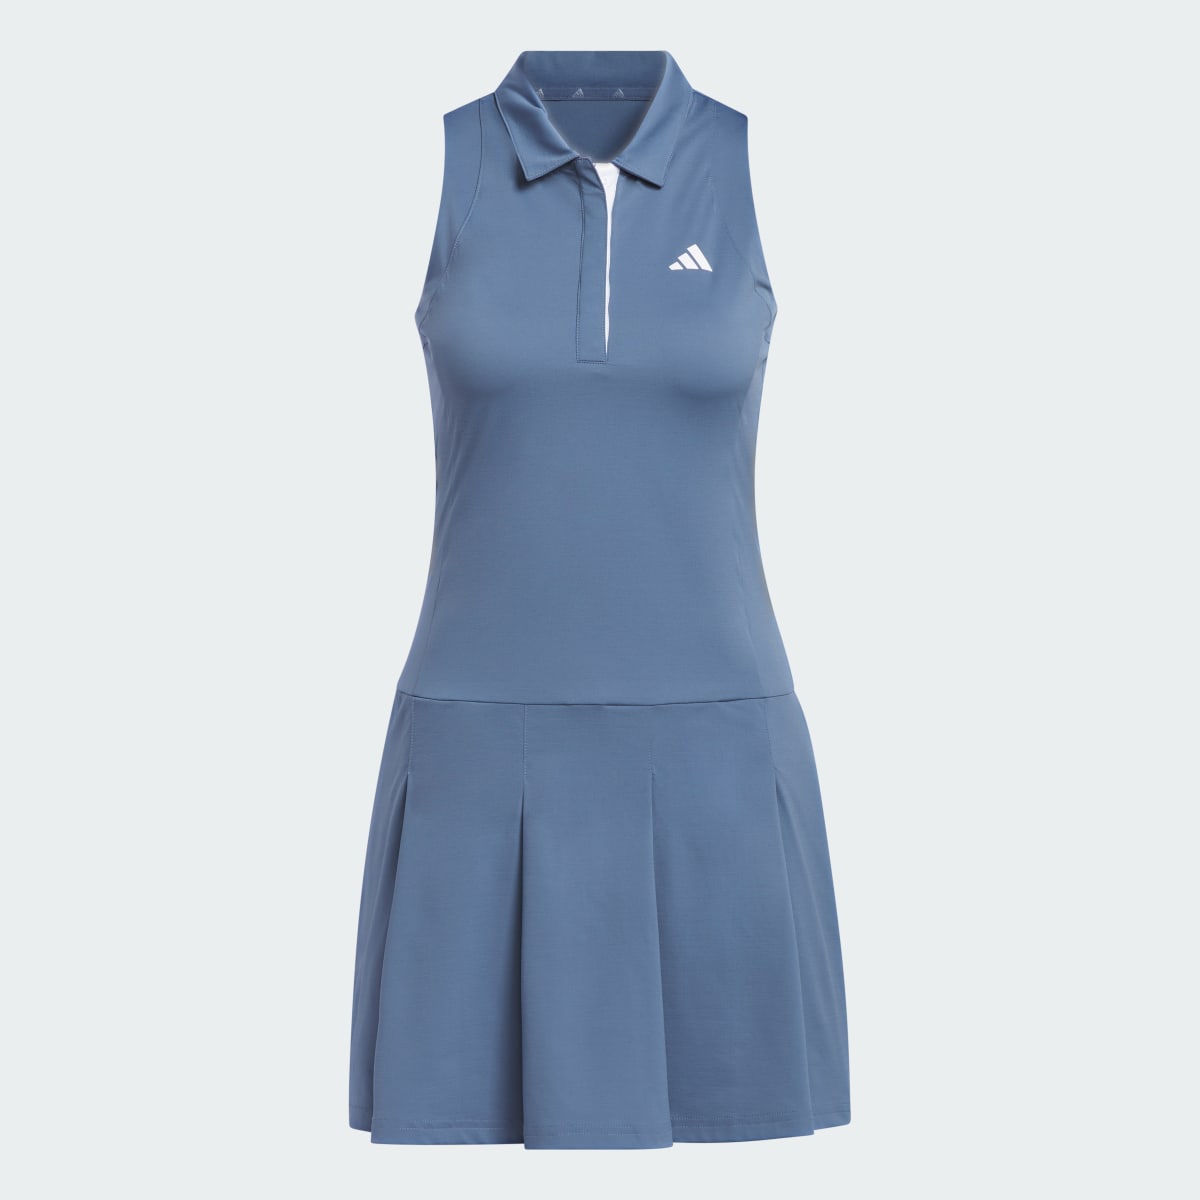 Adidas Women's Ultimate365 Tour Pleated Dress. 6